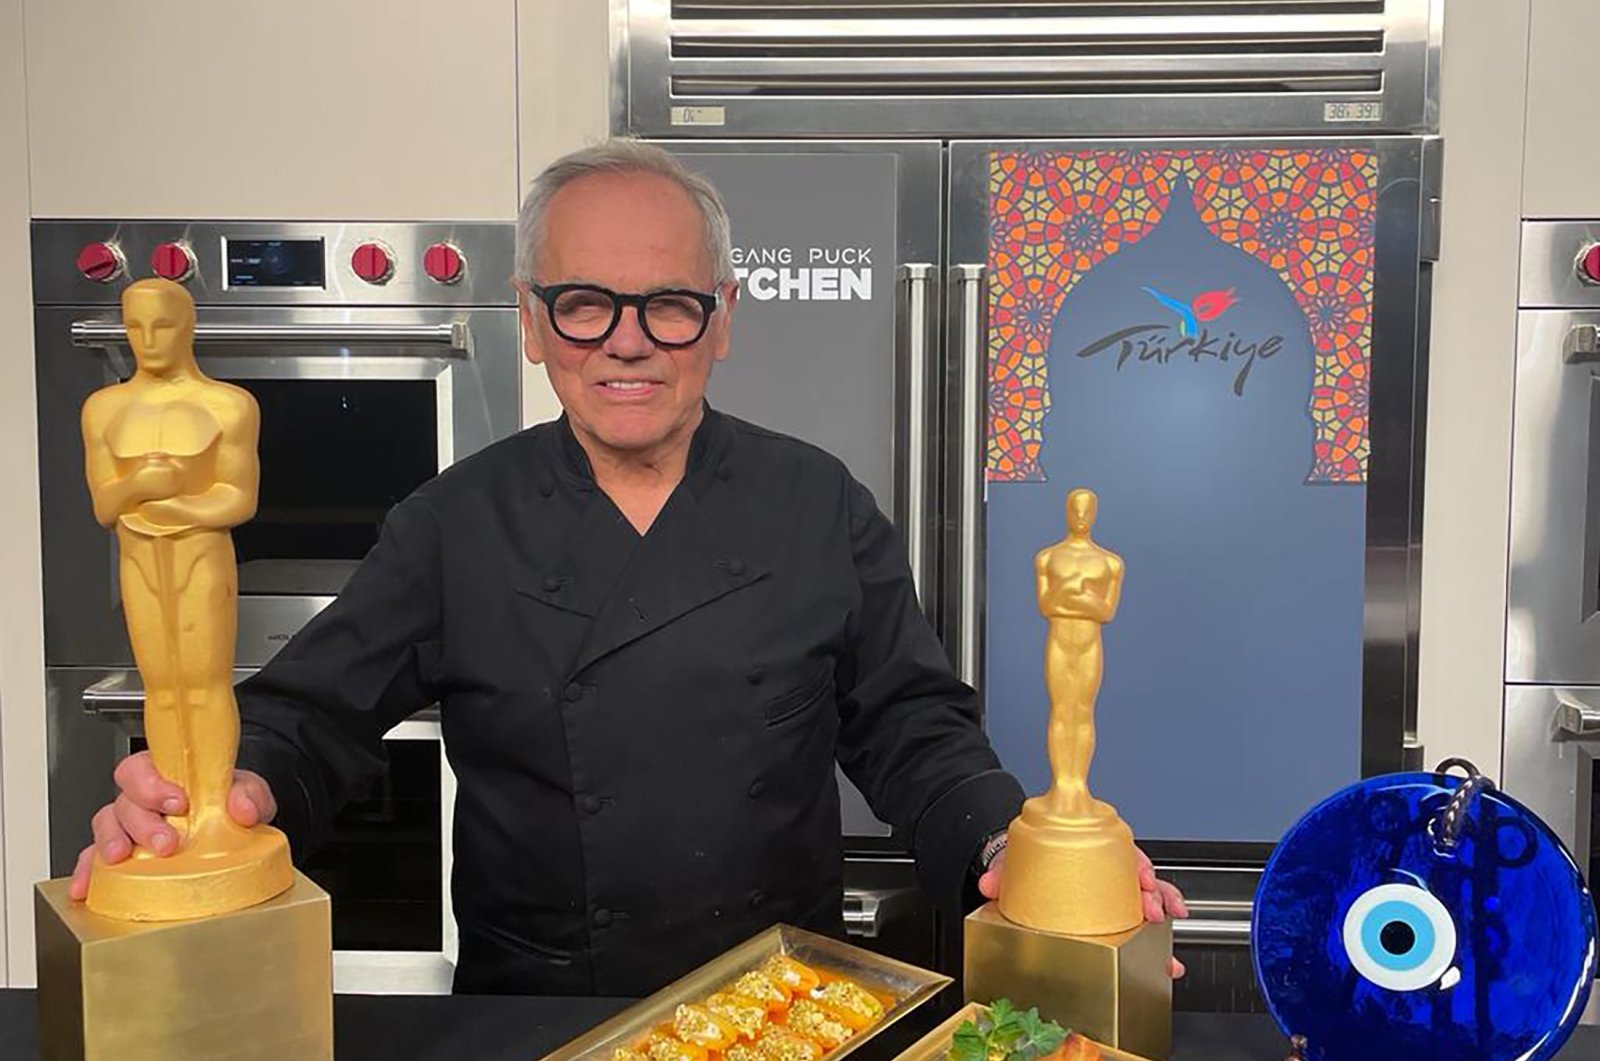 Chef Wolfgang Puck poses with Black Sea pide and Creamy Apricot Dessert prepared for the Academy Awards Governors Ball. (Photo courtesy of TGA)